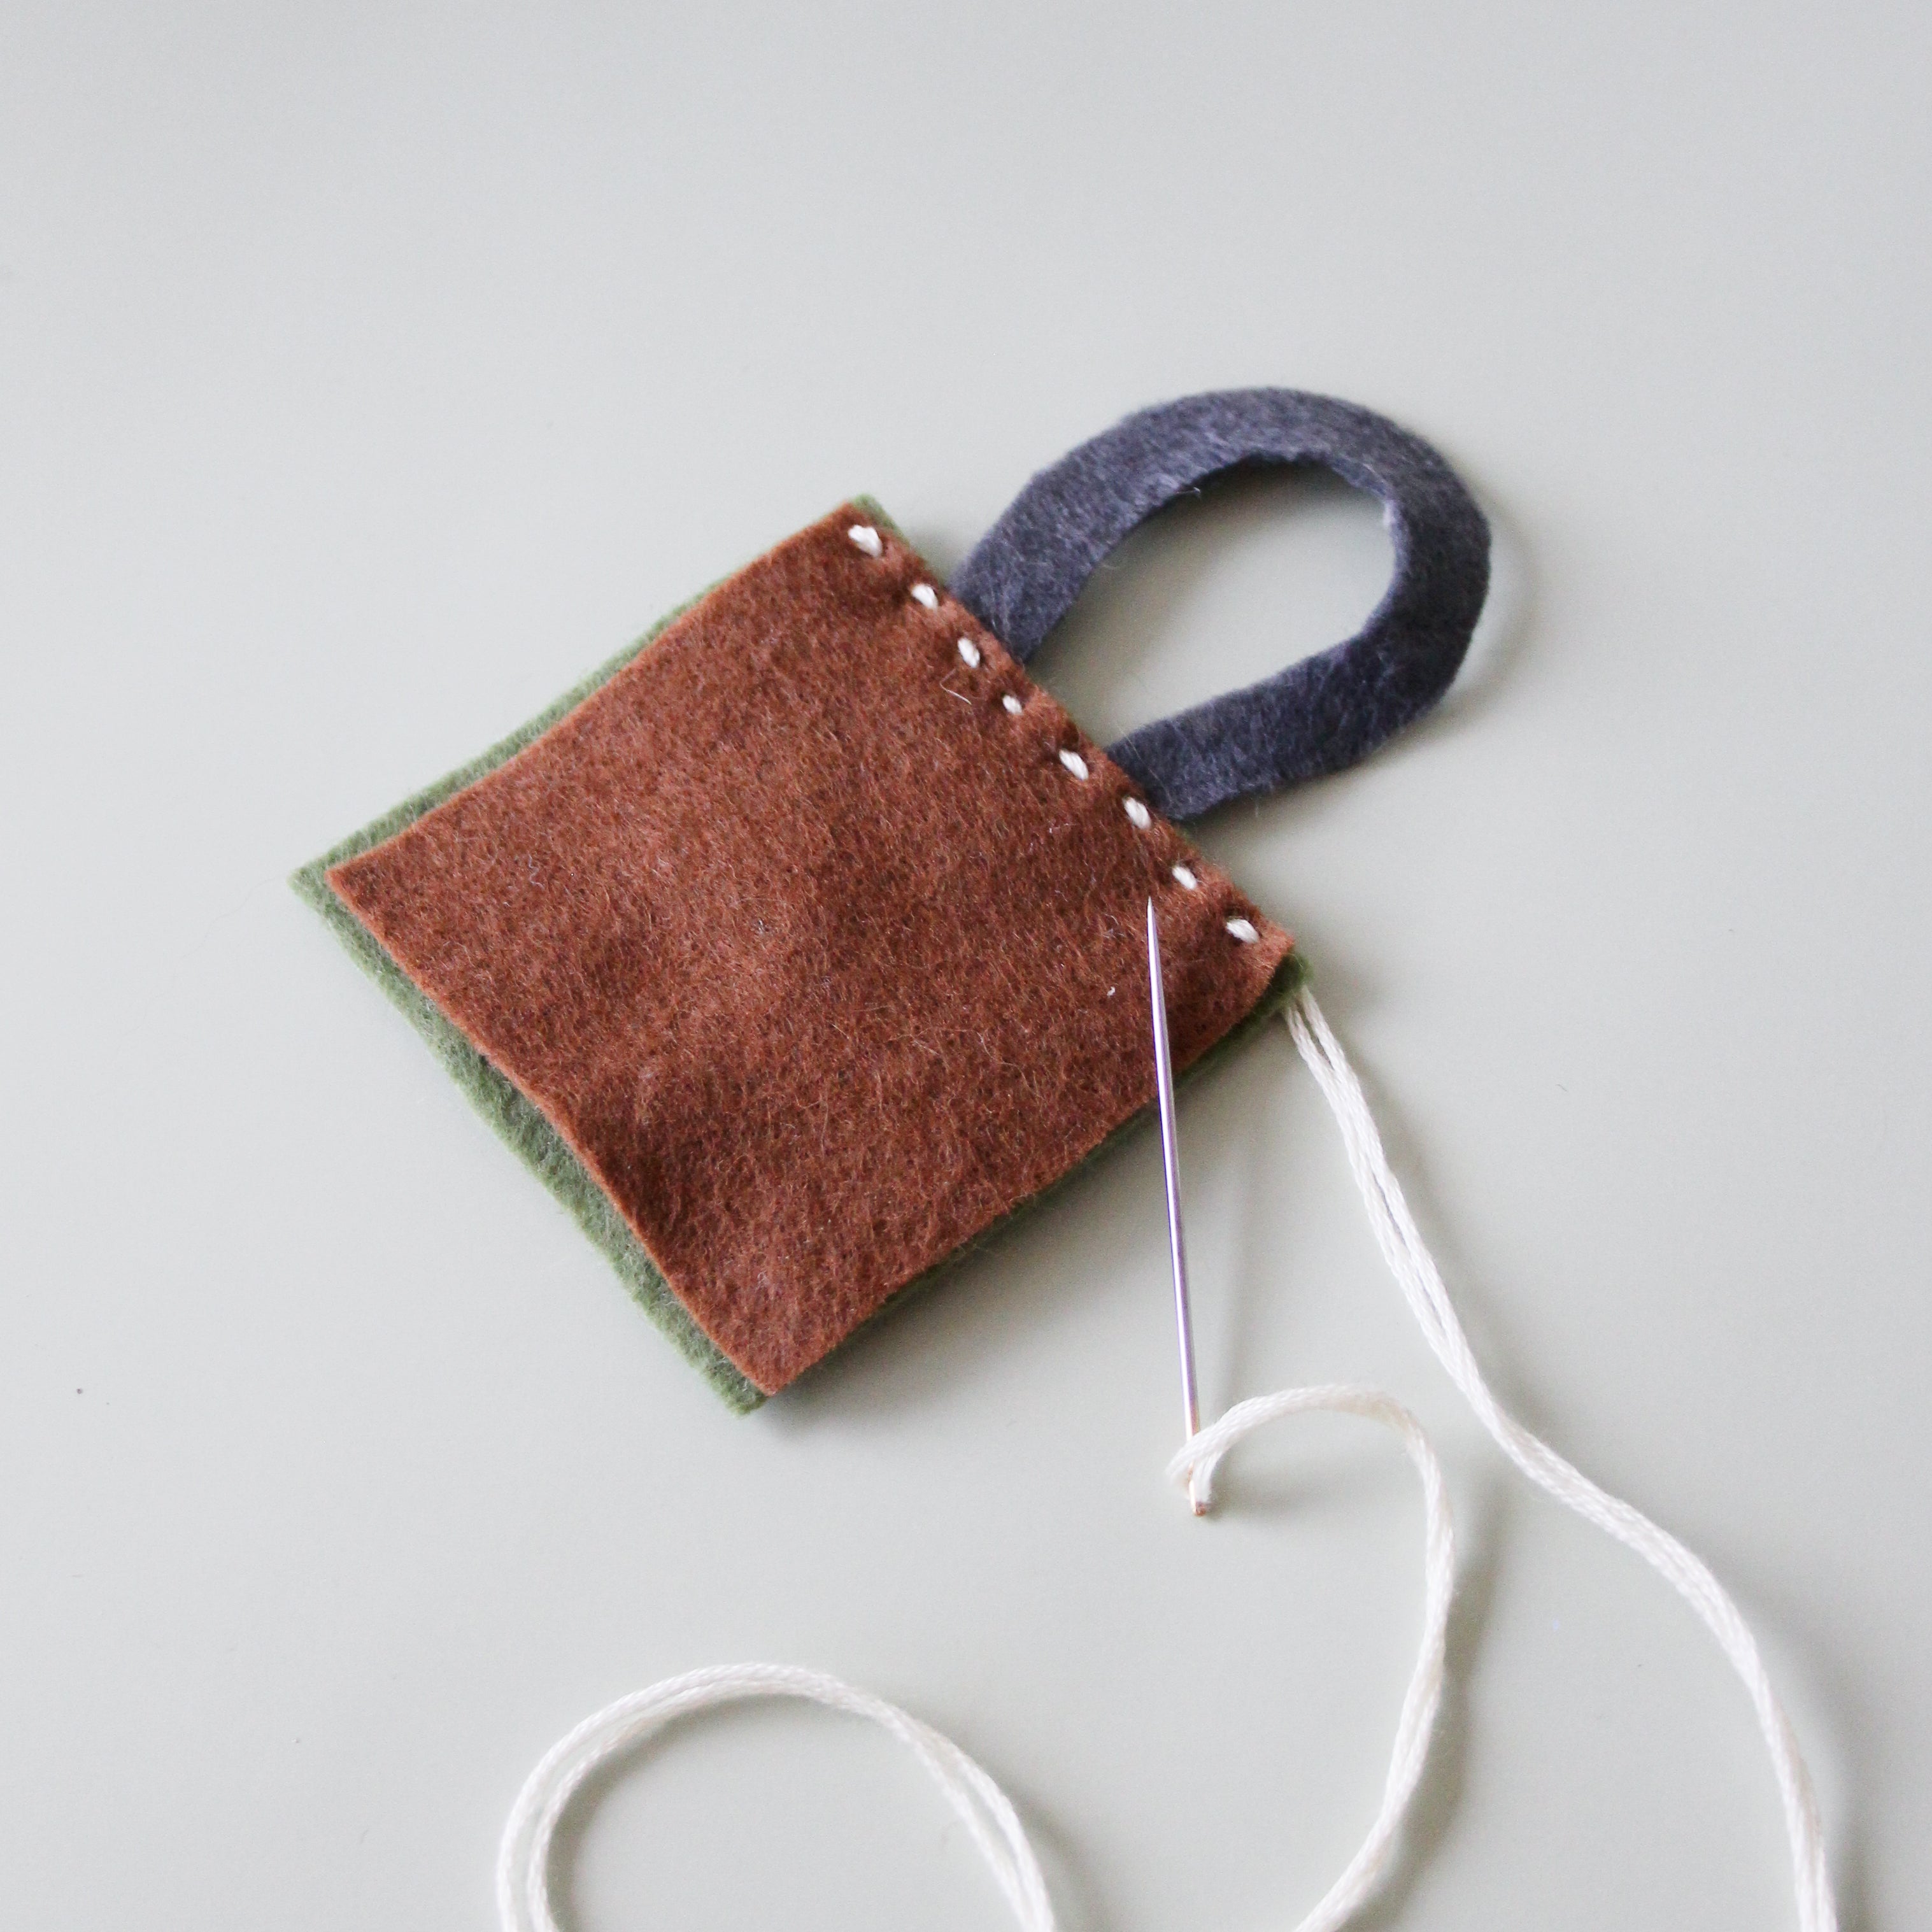 Two pieces of felt are being embroidered with a felt handle.